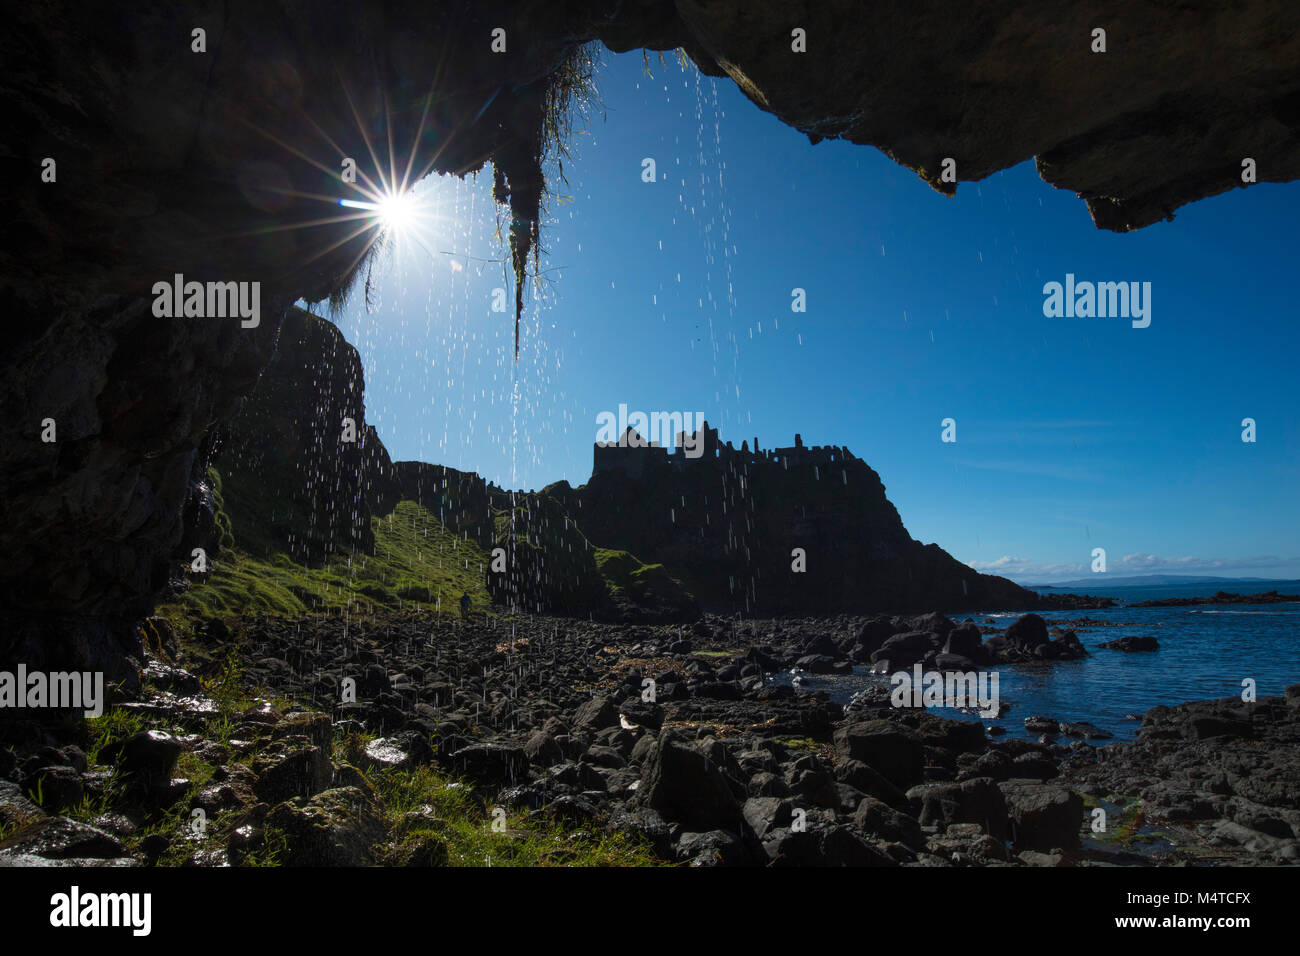 Silhouette of Dunluce Castle from inside a sea cave, Causeway Coast, County Antrim, Northern Ireland. Stock Photo